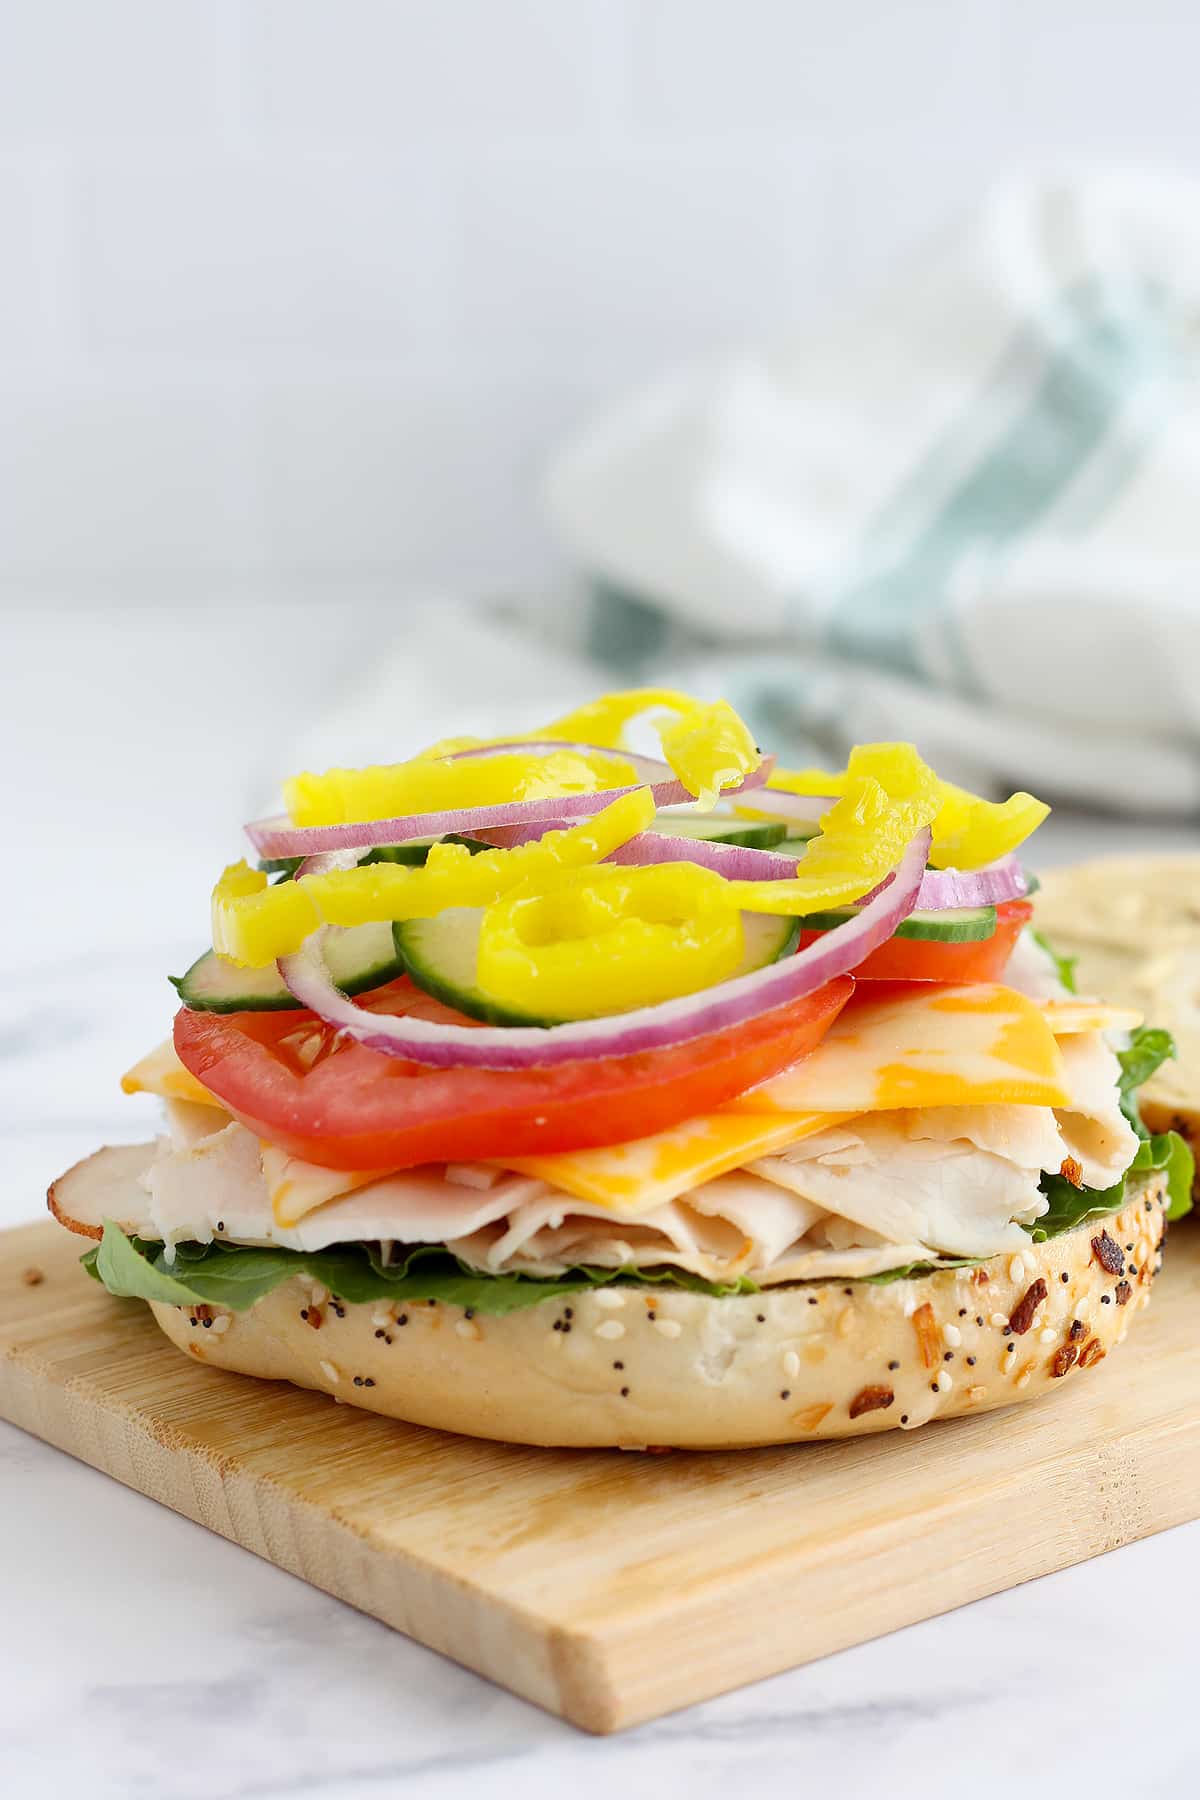 Half of a bagel topped with lettuce, turkey, cheese, and vegetables on a wooden cutting board.